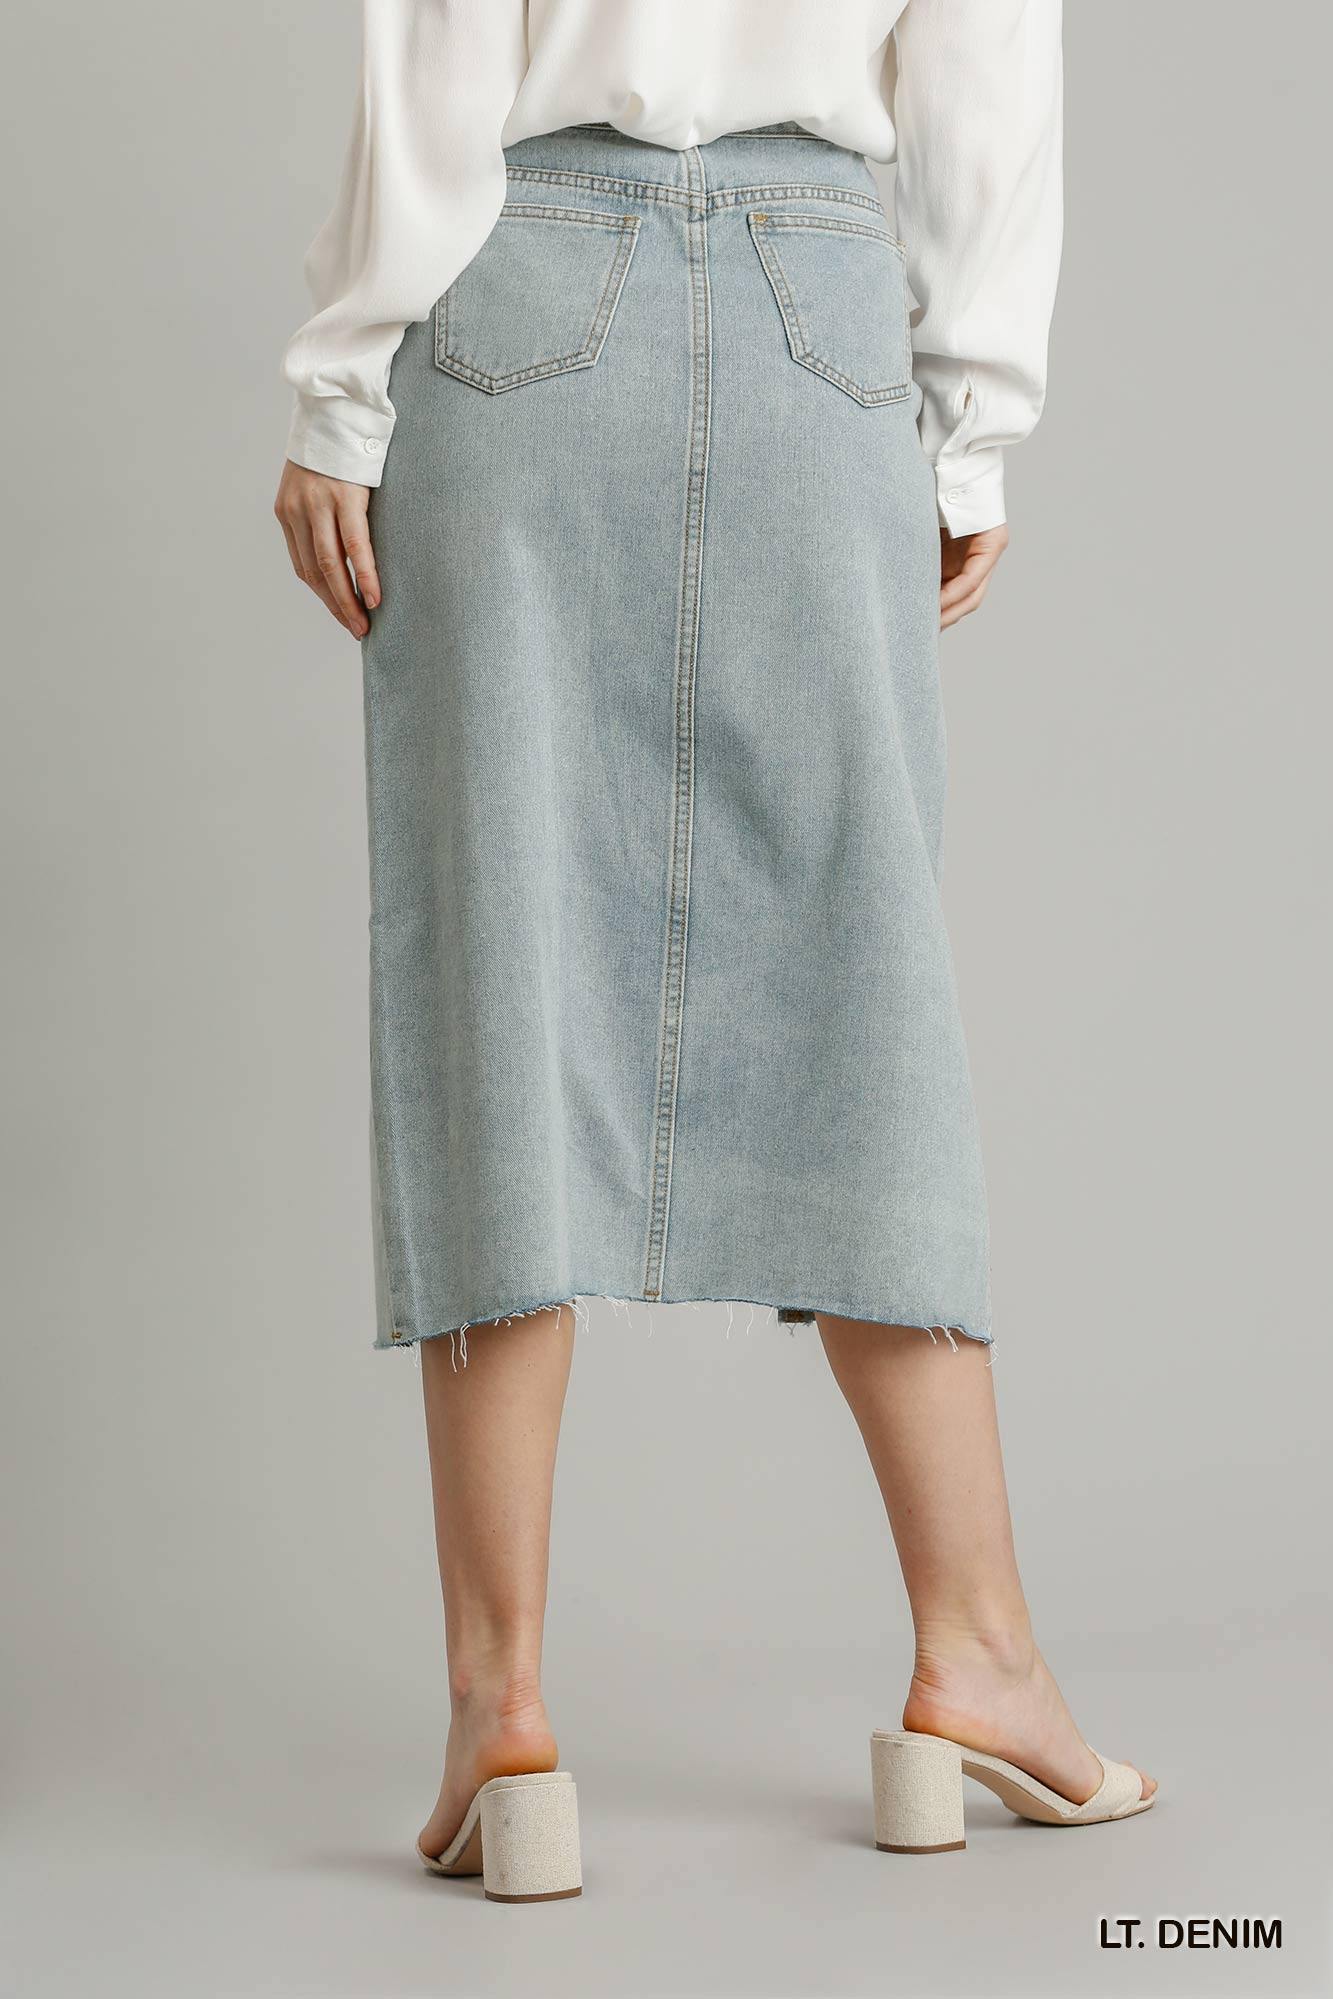 Asymmetrical Waist And Button Up Front Split Denim Skirt With Back Pockets And Unfinished Hem - Pearlara